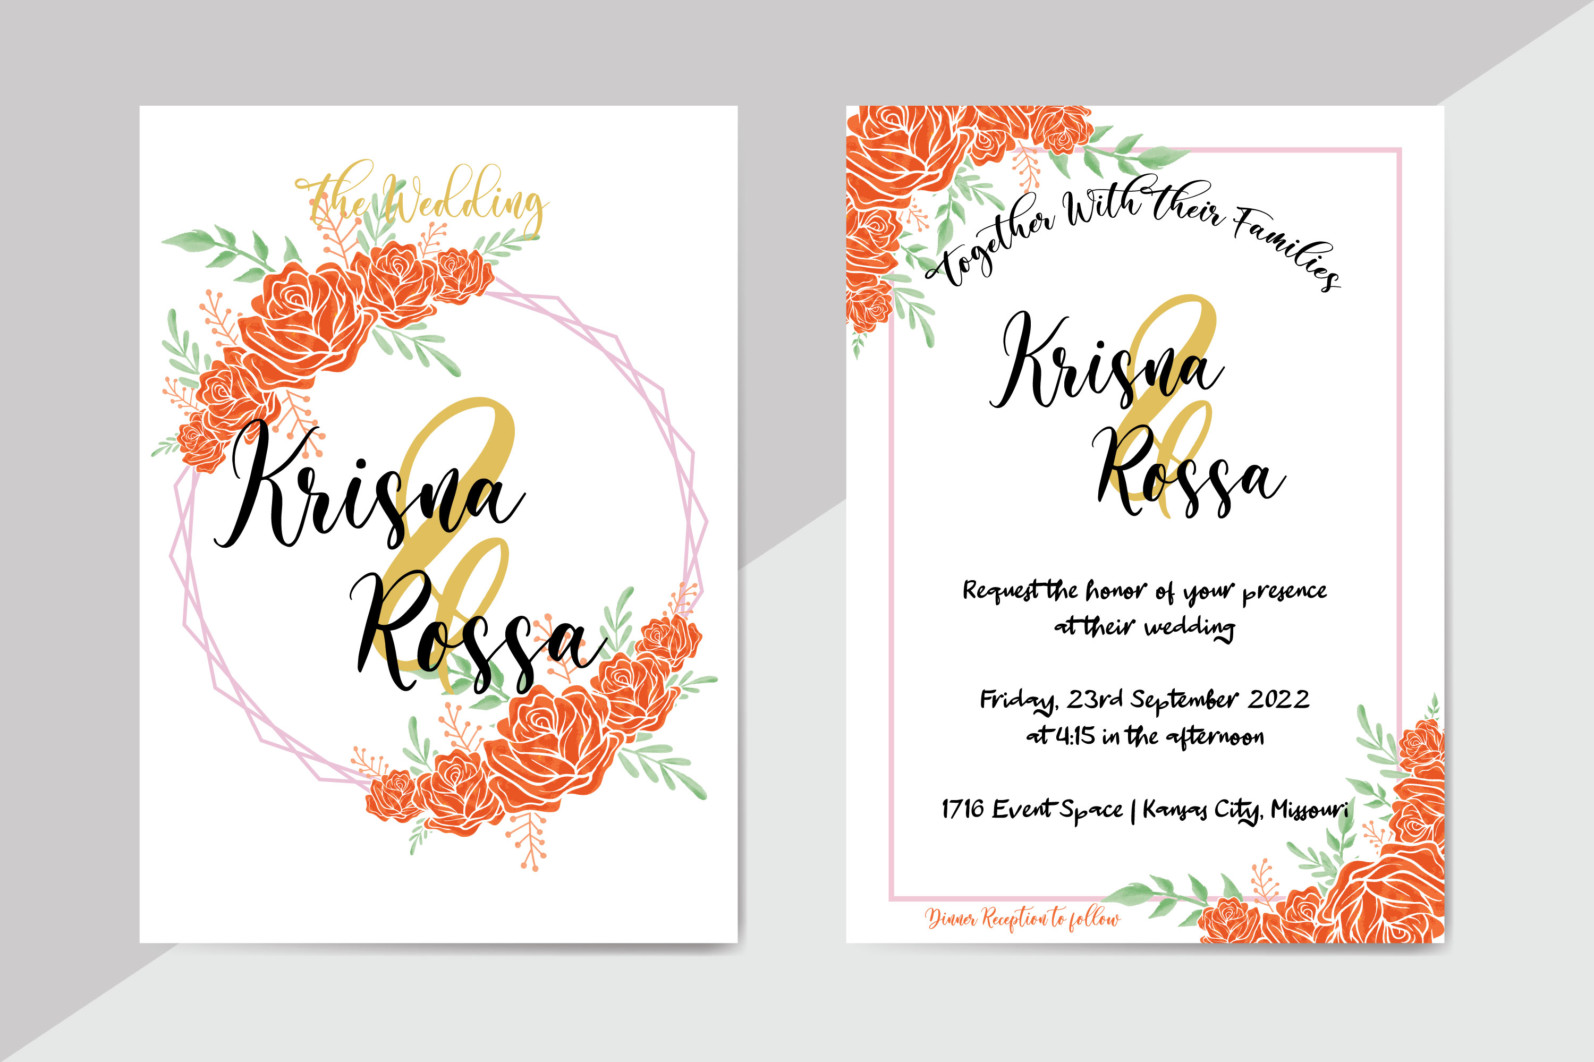 Wedding Invitation Card with Watercolor Floral Decoration - Watercolor Flower Wedding Invitation Spring Bloom Hand Drawn 05 03 scaled -